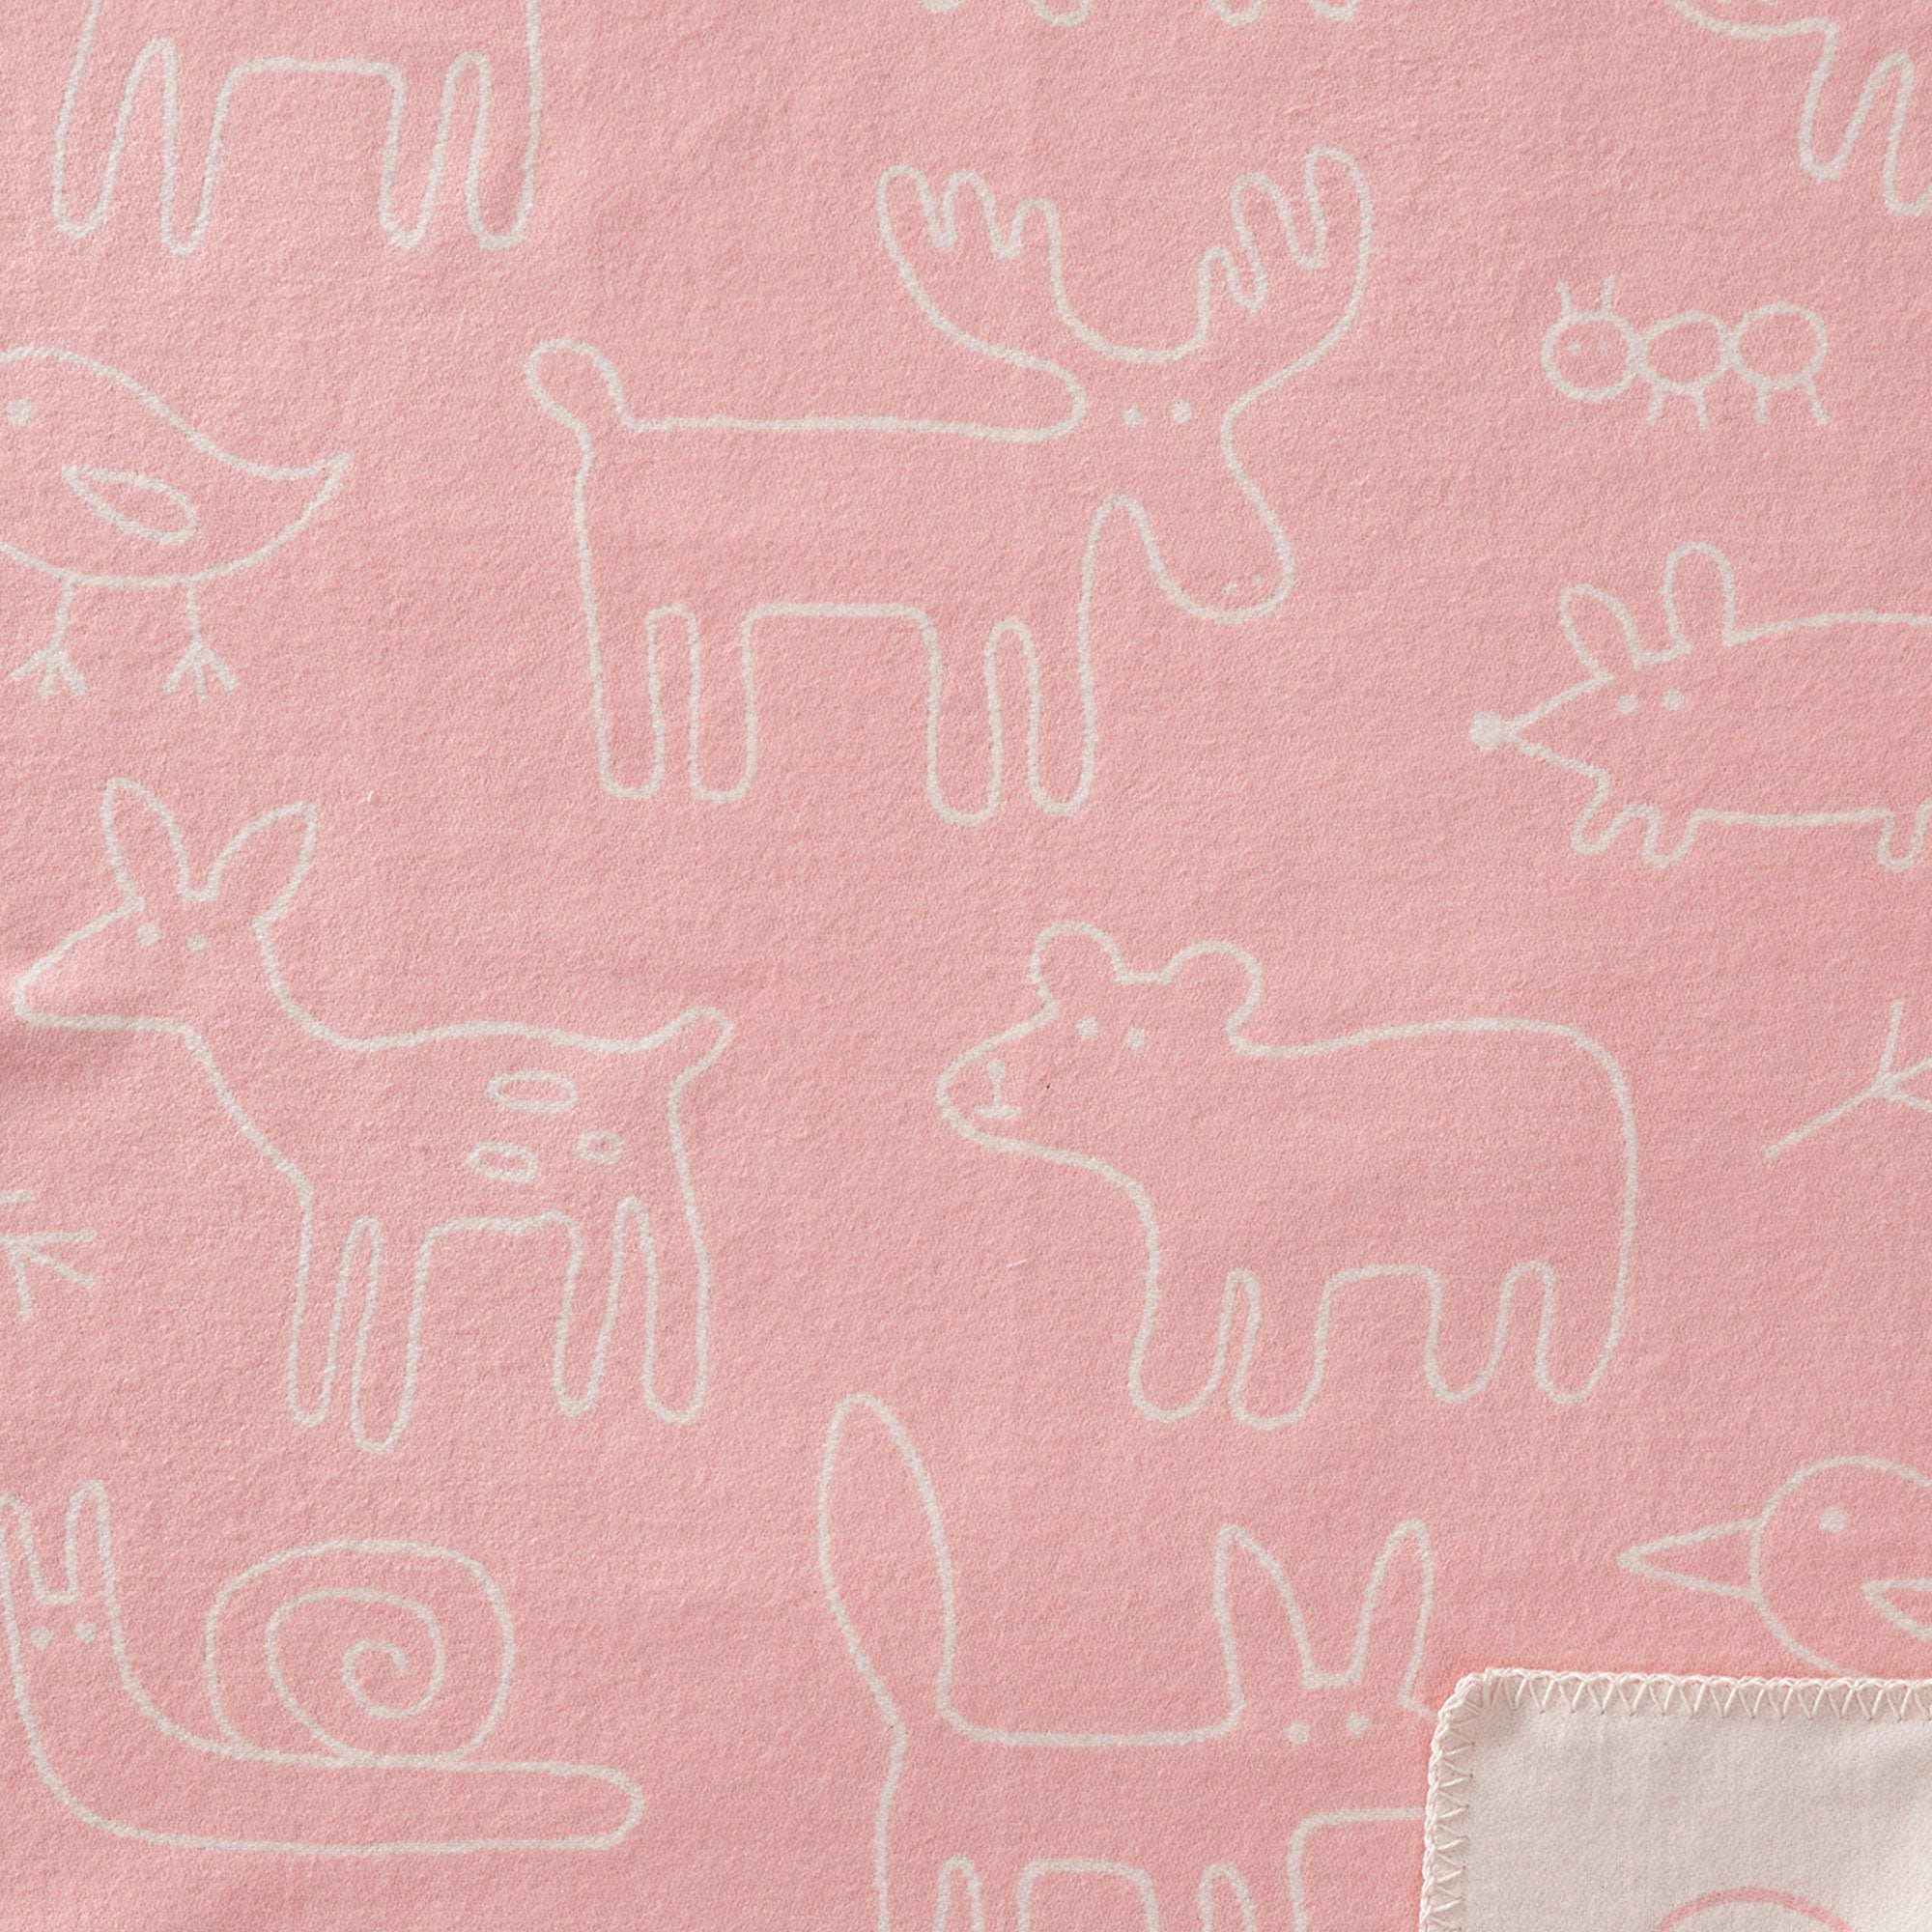 In the Woods Pink 70x90cm Organic Brushed Cotton Blanket